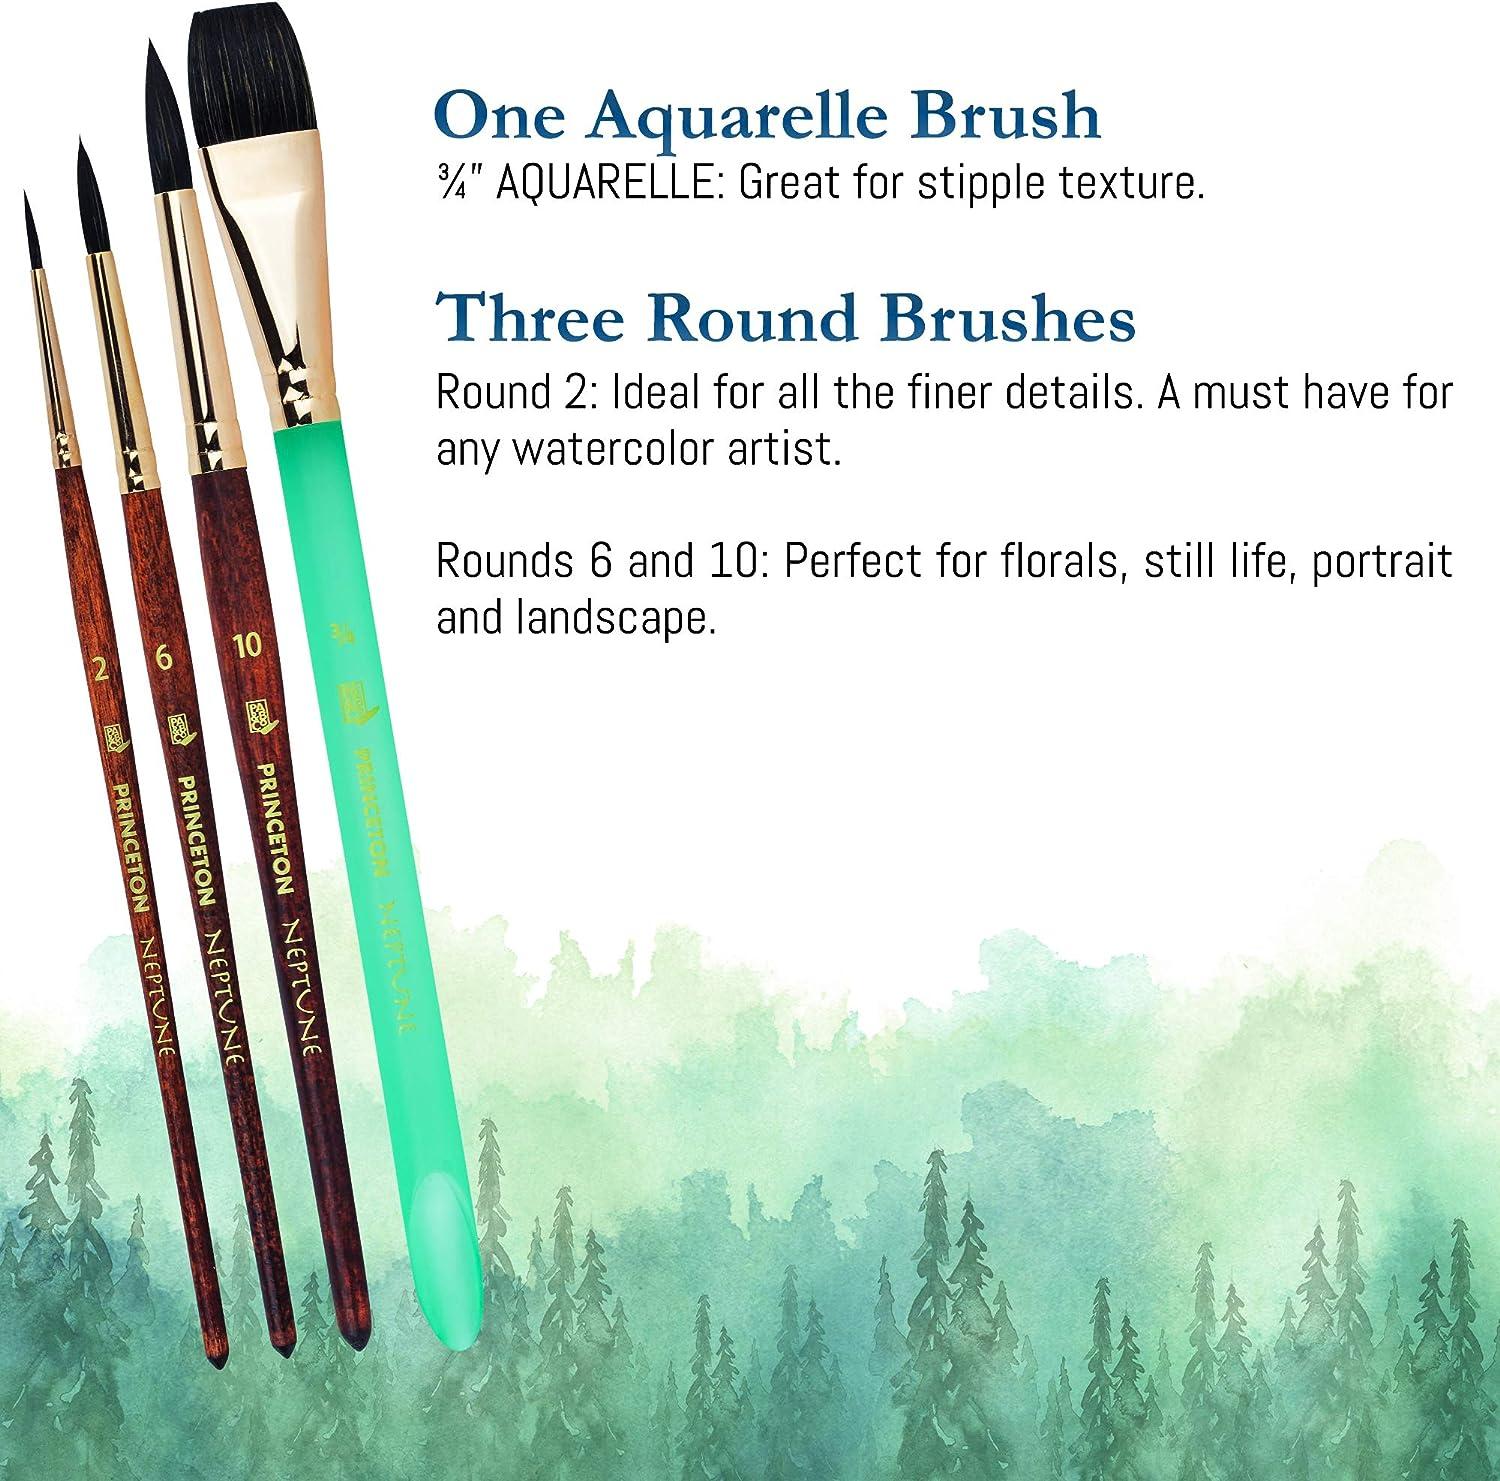 Princeton Neptune Watercolor Brushes 4750 Series - 4pc Soft Synthetic  Squirrel Watercolor Brush Set - Aquarelle 3/4 inch - Round 2 - Round 6 -  Round 10 - Artist Paint Brushes - Paint Brush Set